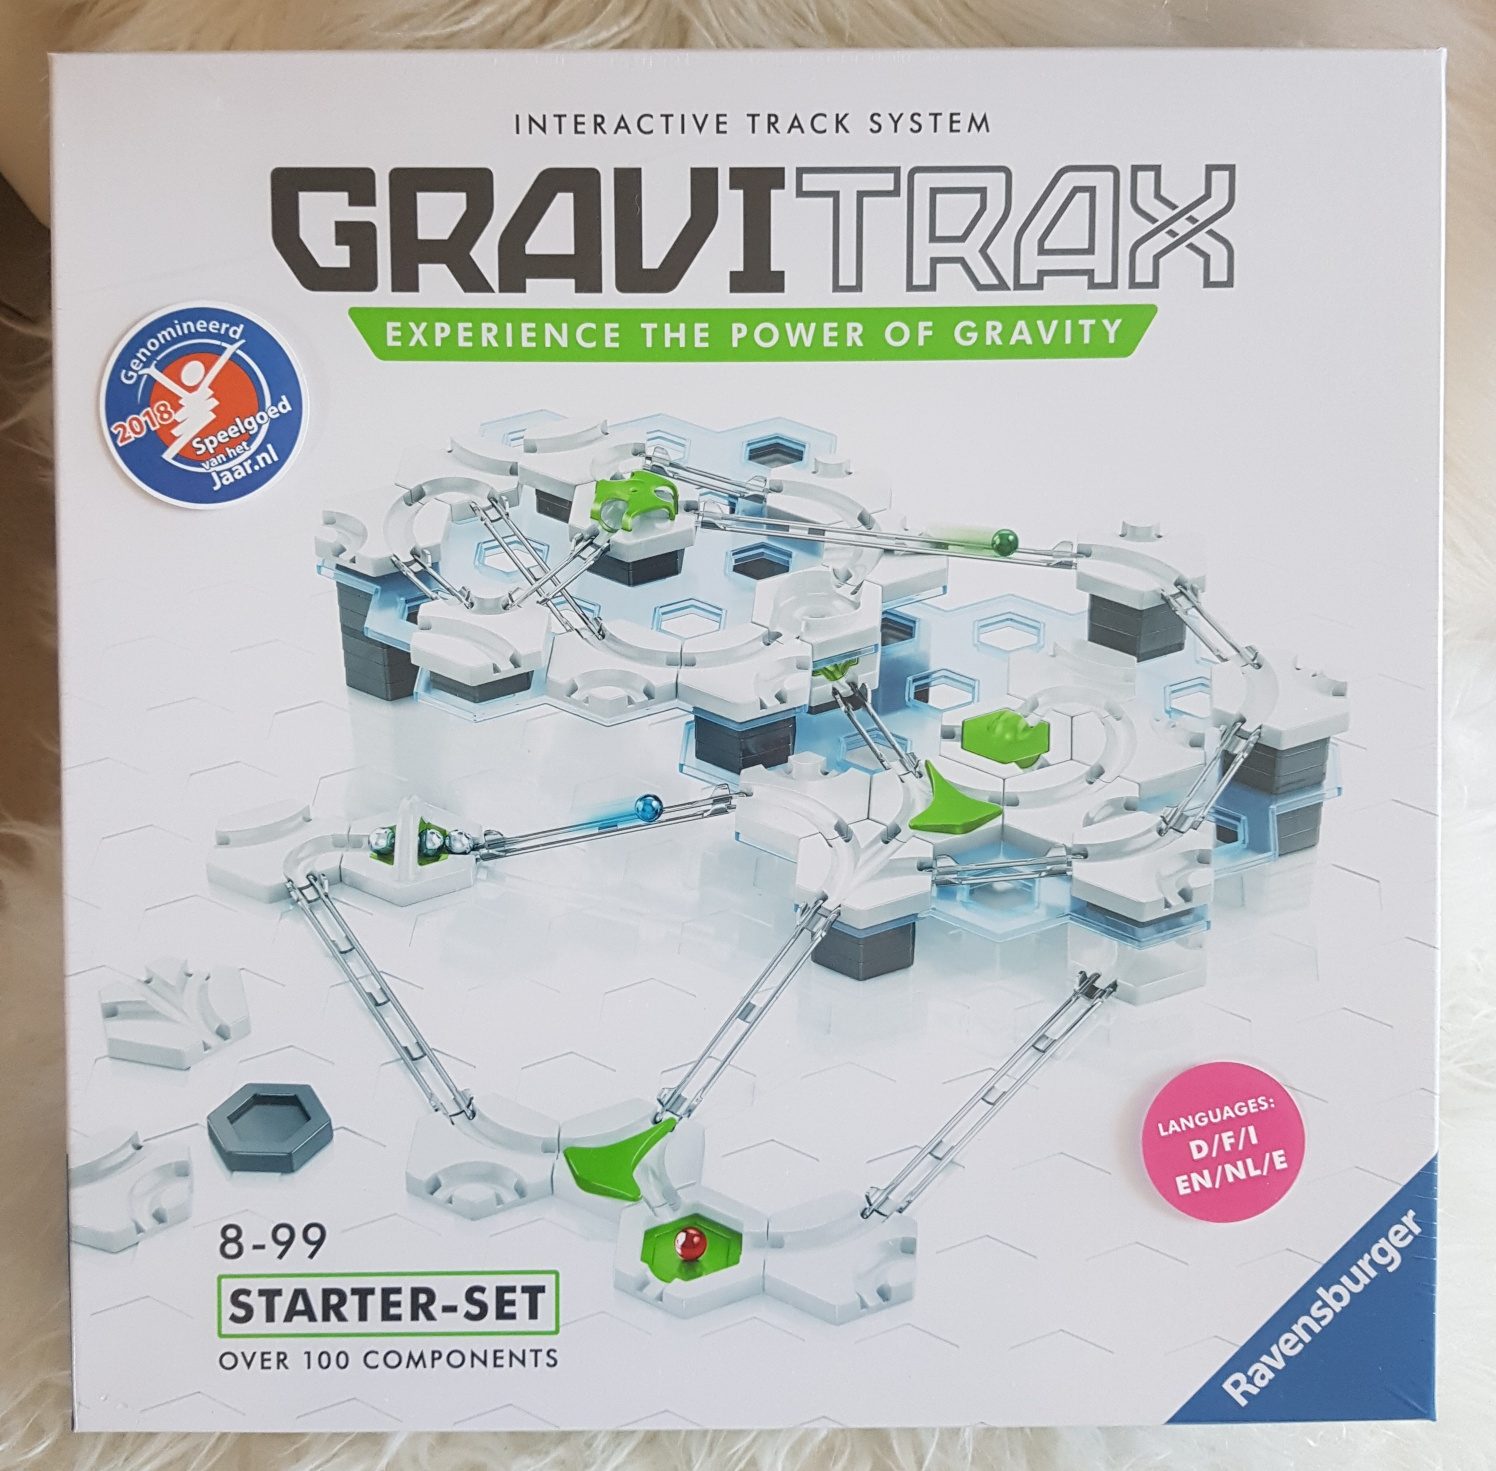 Gravitrax review